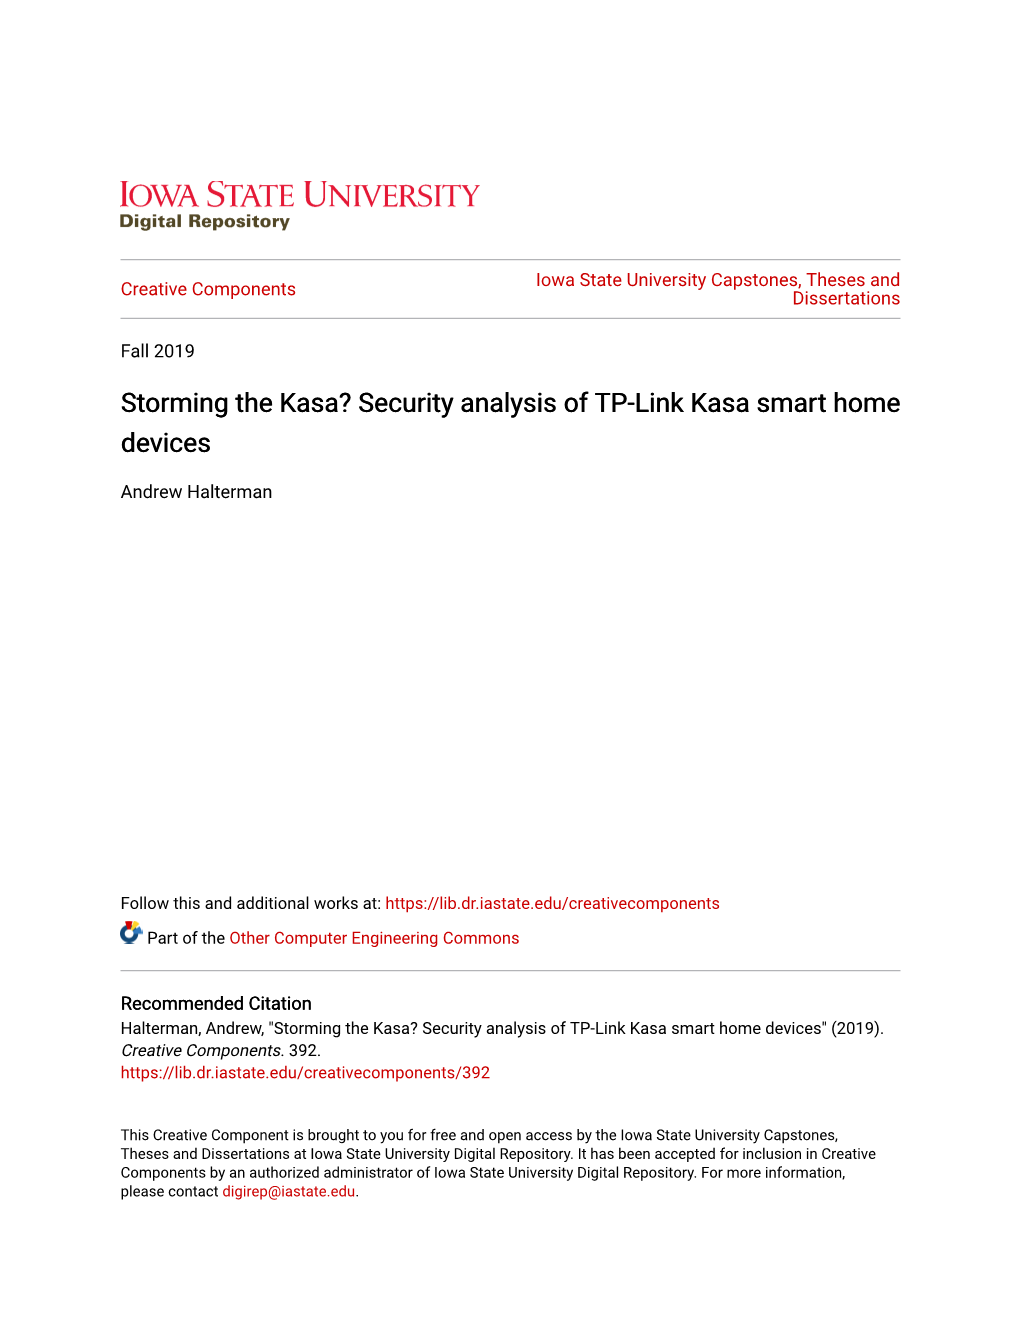 Storming the Kasa? Security Analysis of TP-Link Kasa Smart Home Devices